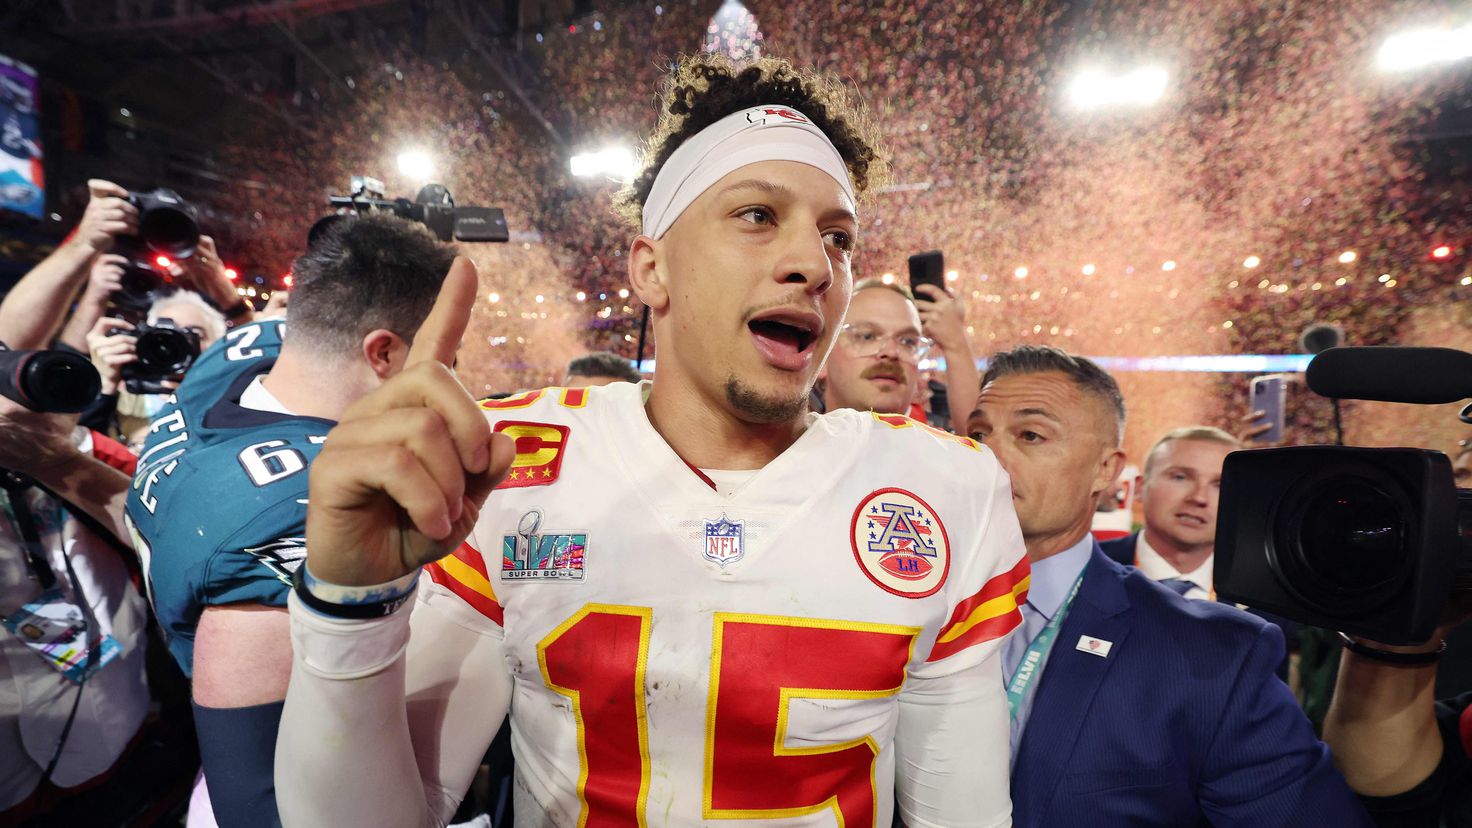 Patrick Mahomes is more concerned with being a champion than with being the highest paid QB
